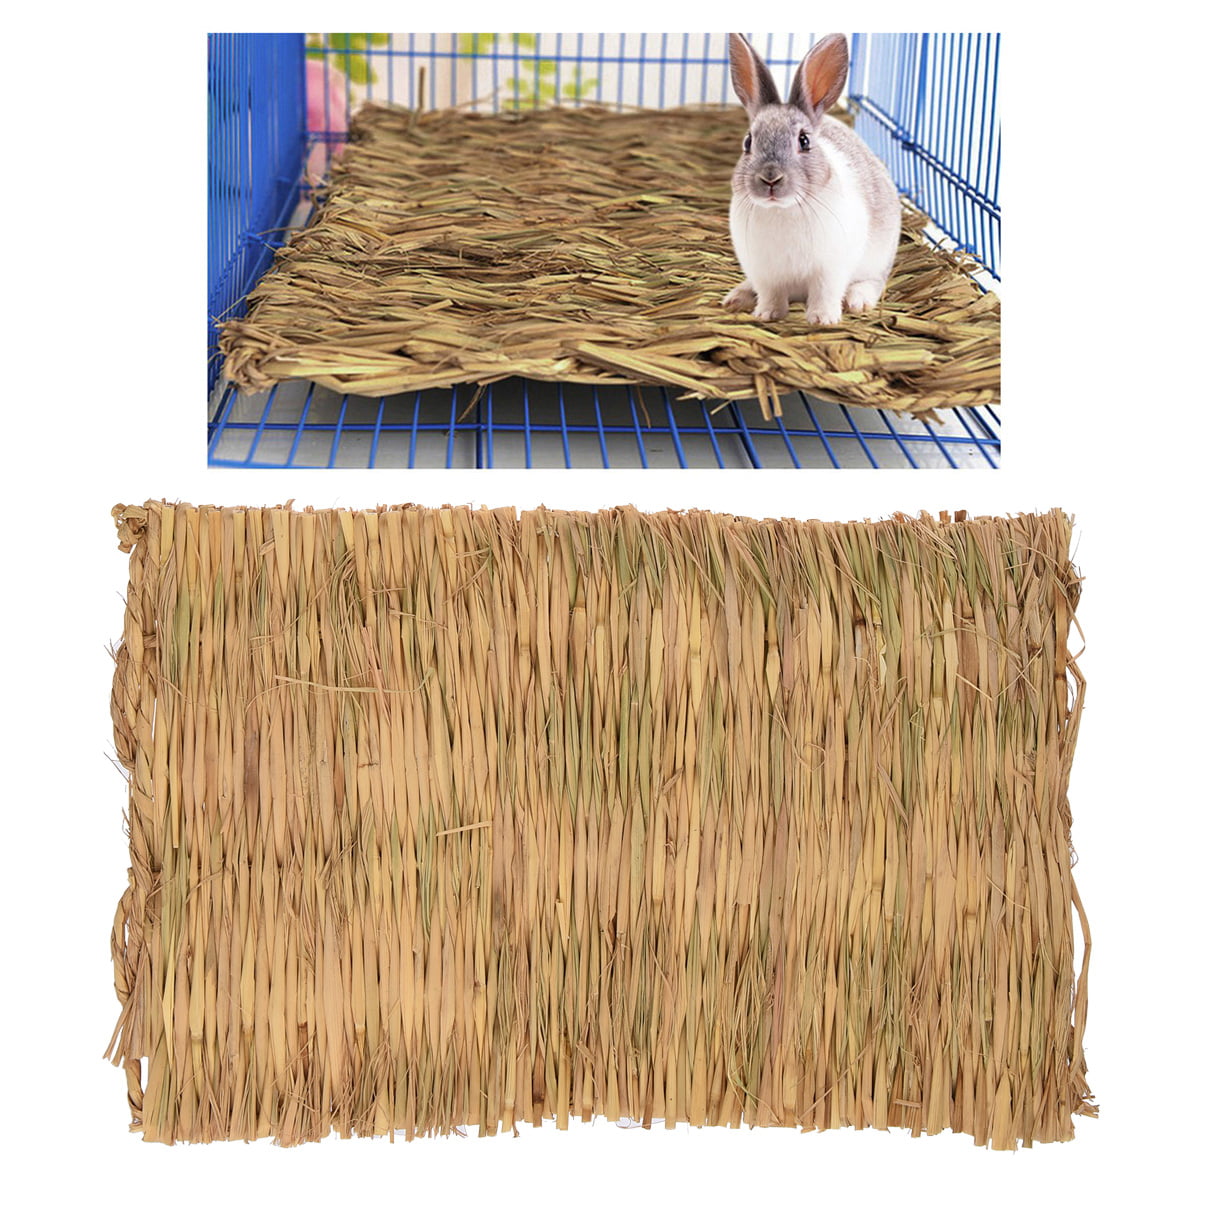 HXHON Rabbit Grass Bed Portable Woven Small Animals Laying Sleeping Playing Bed for Rabbits Chinchillas Guinea Pigs